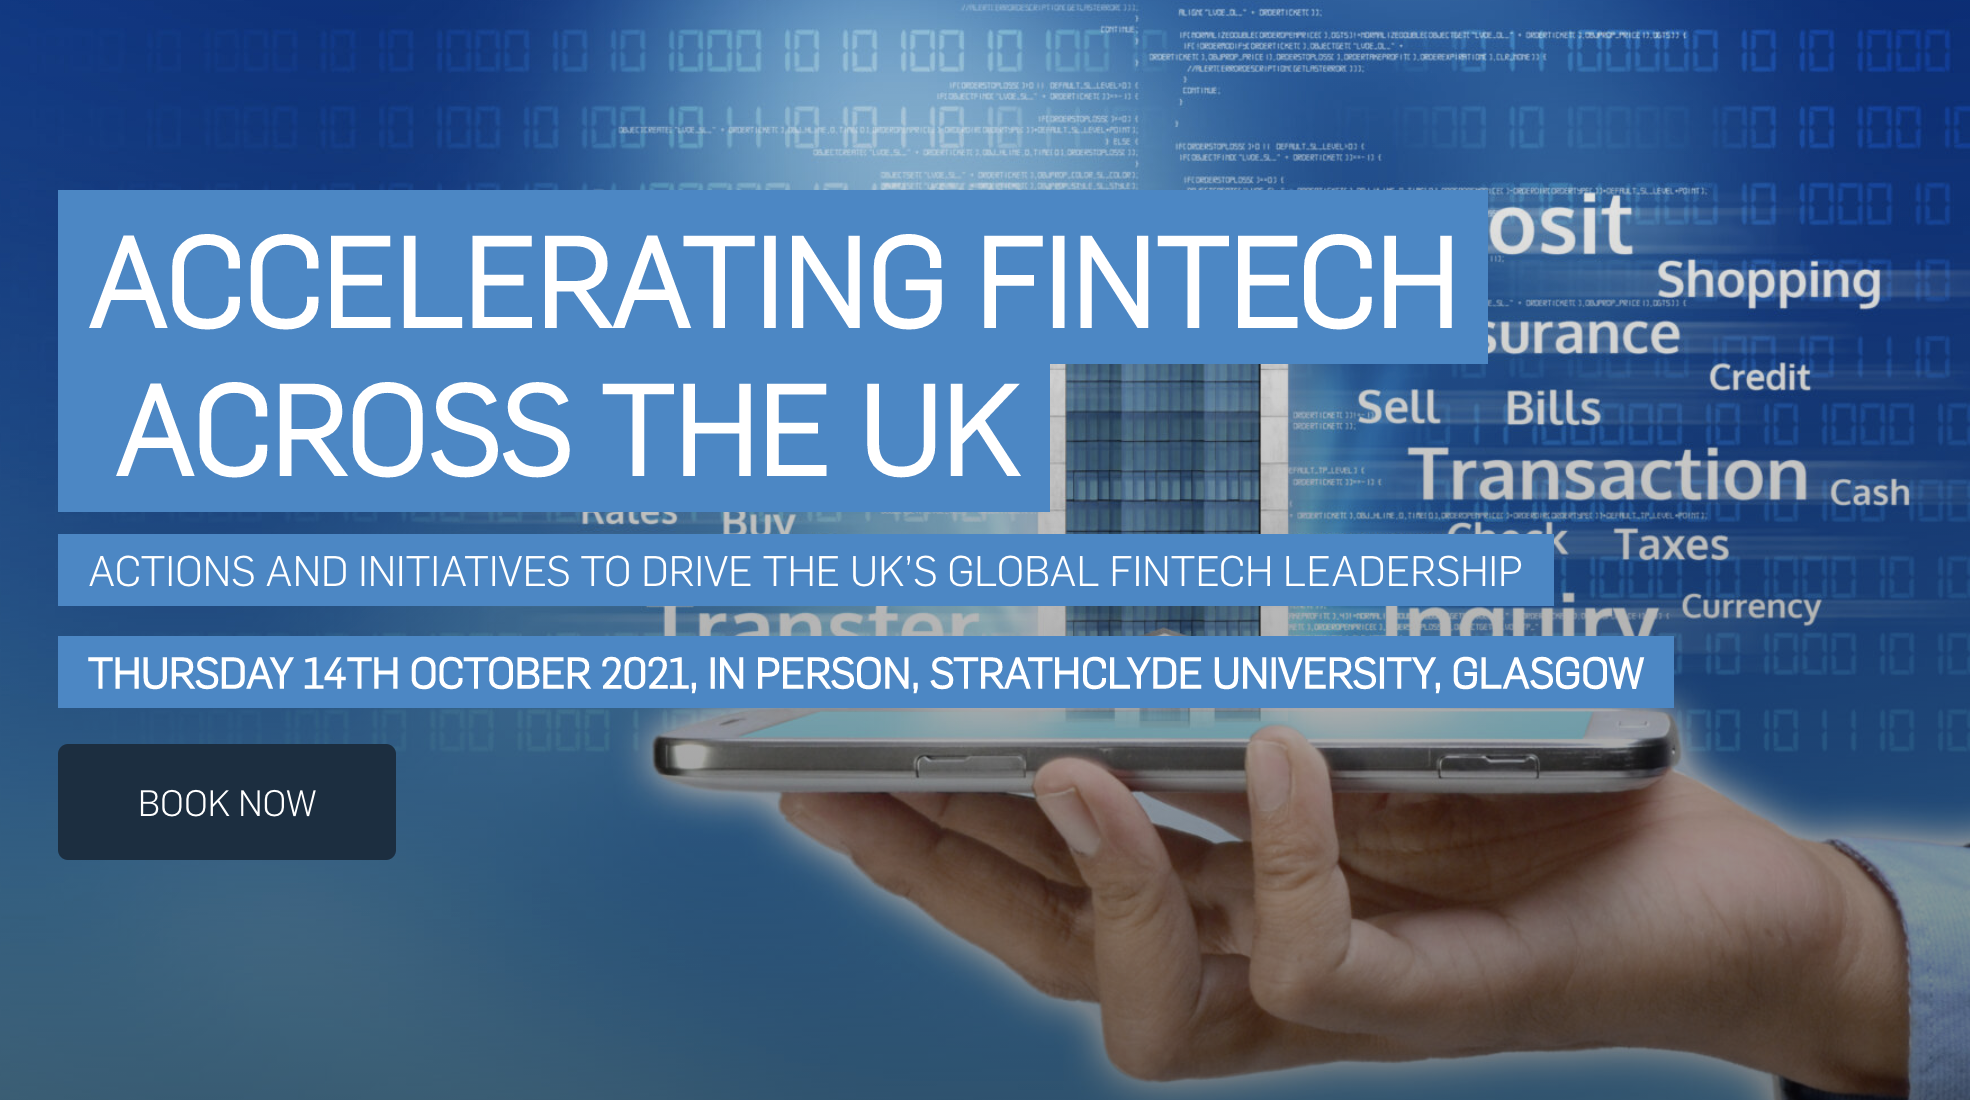 FinTech North takes part in National FinTech event in Glasgow